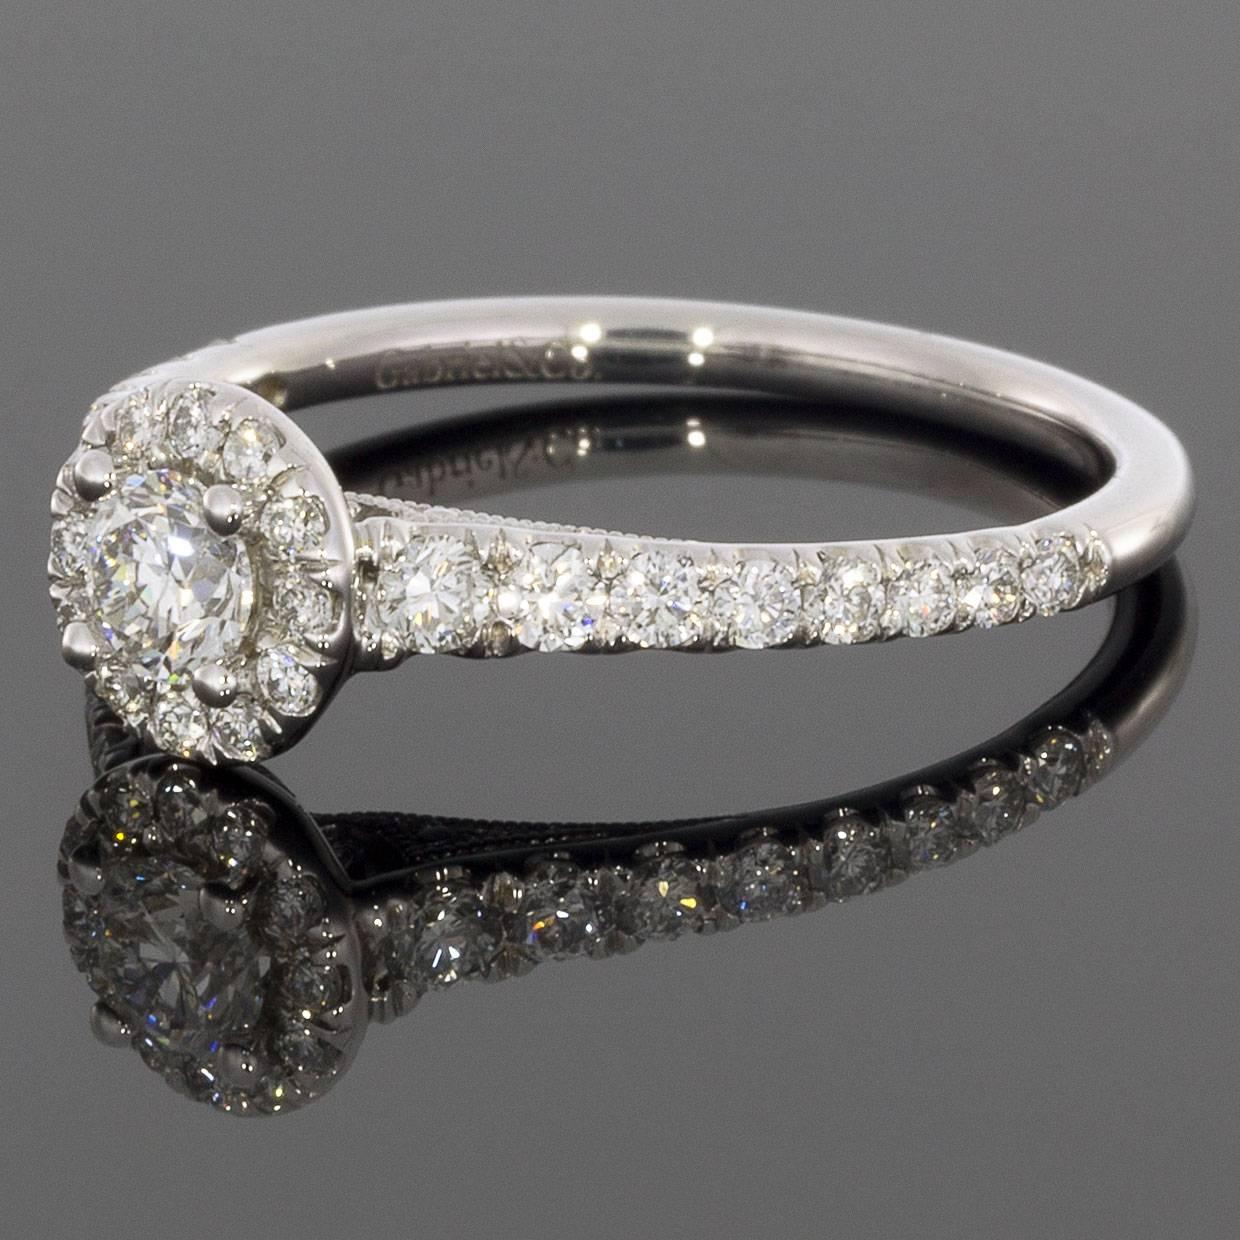 This beautiful diamond engagement ring features a 0.24 carat round diamond center stone and has a total carat weight of 0.87 including accent stones with a color and clarity grade of G-H/SI. The round center stone is prong set in a 14 karat white